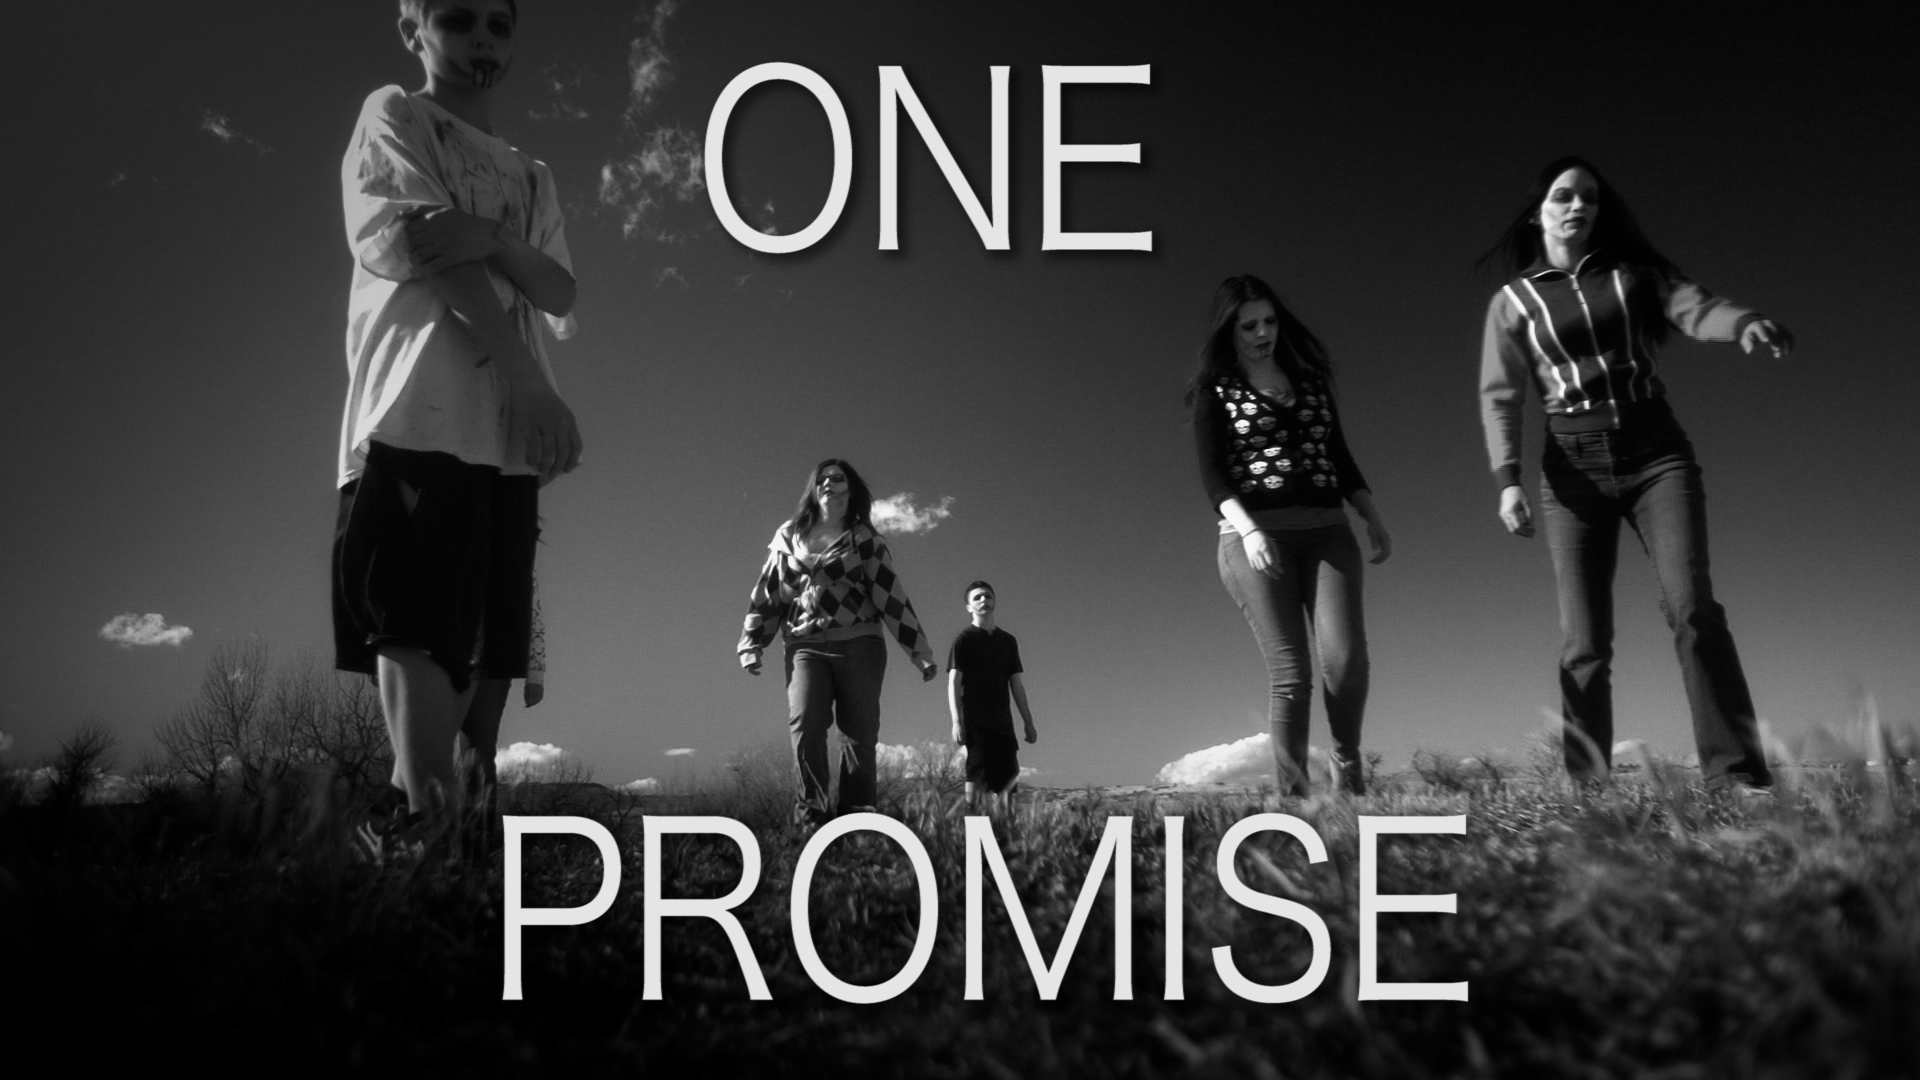 One promise